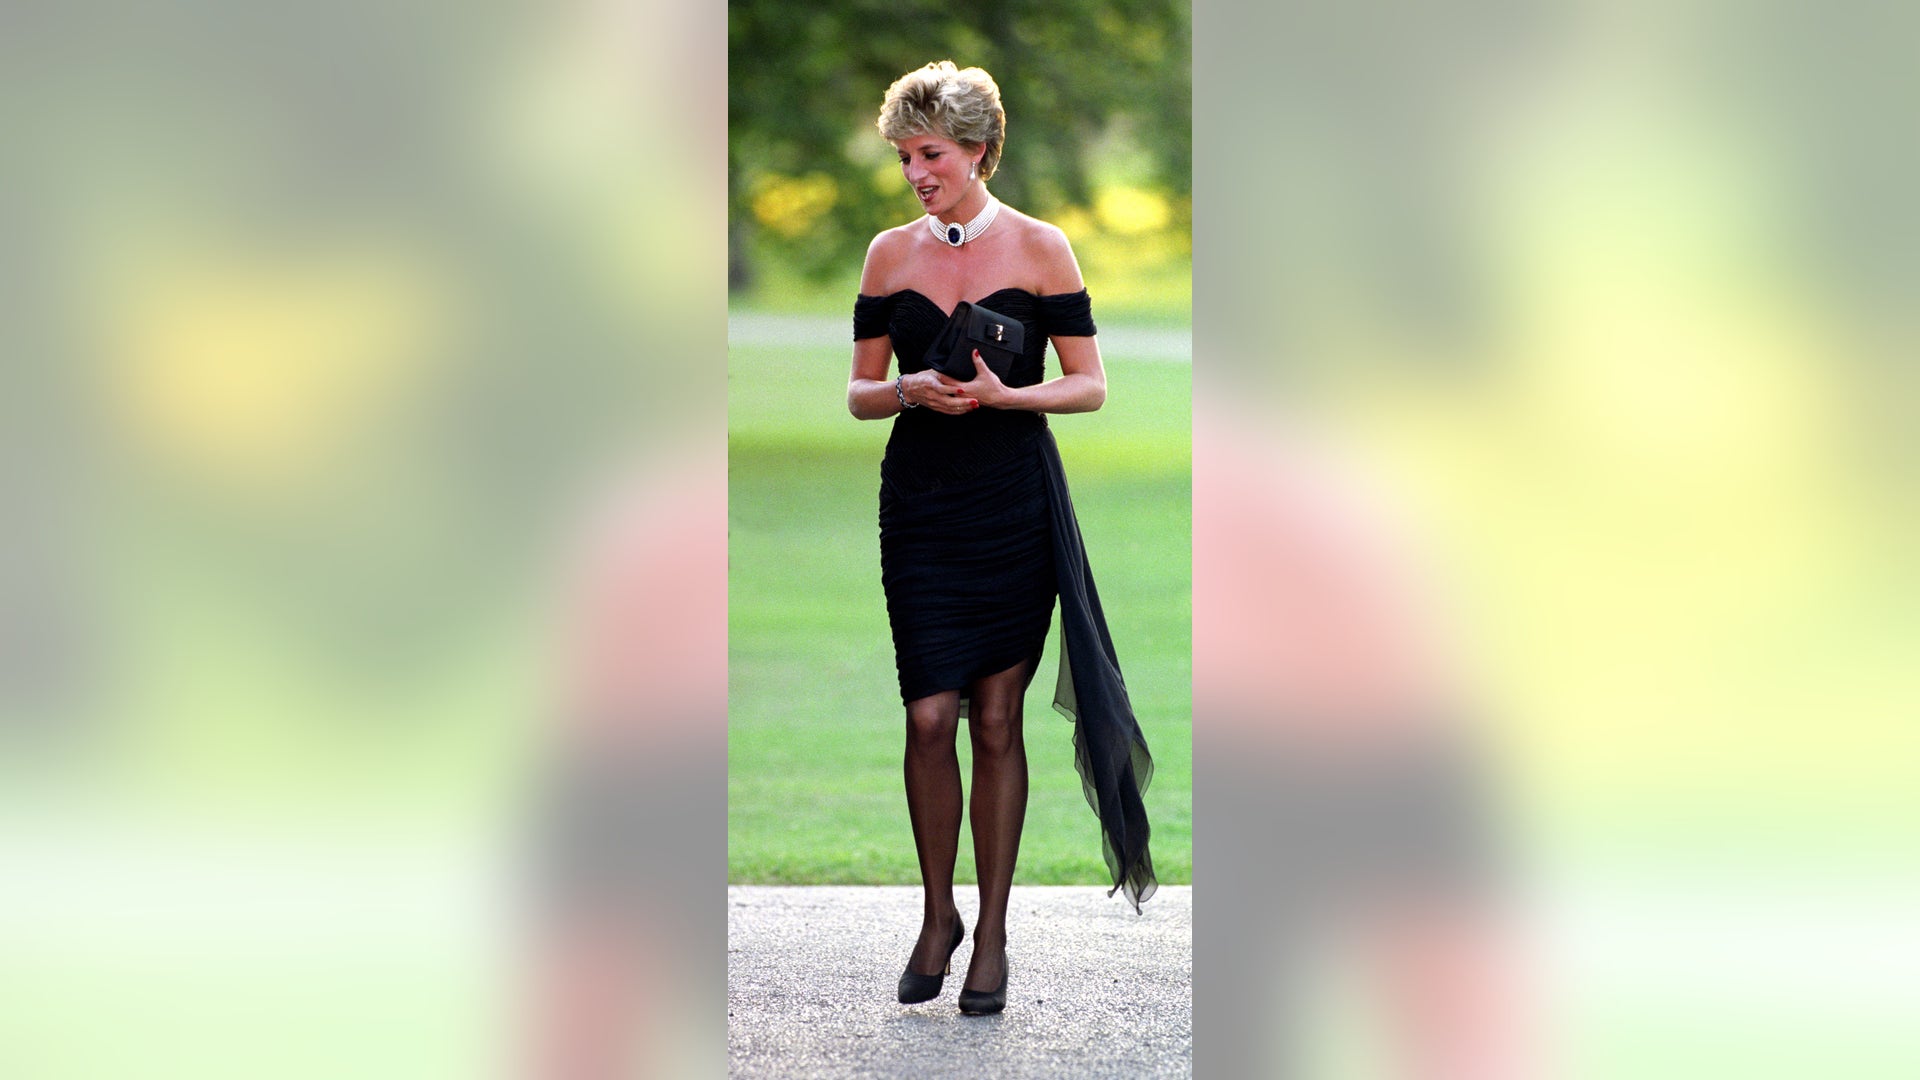 Remembering Princess Diana A Look At The Late Royals Life In Pictures Fox News